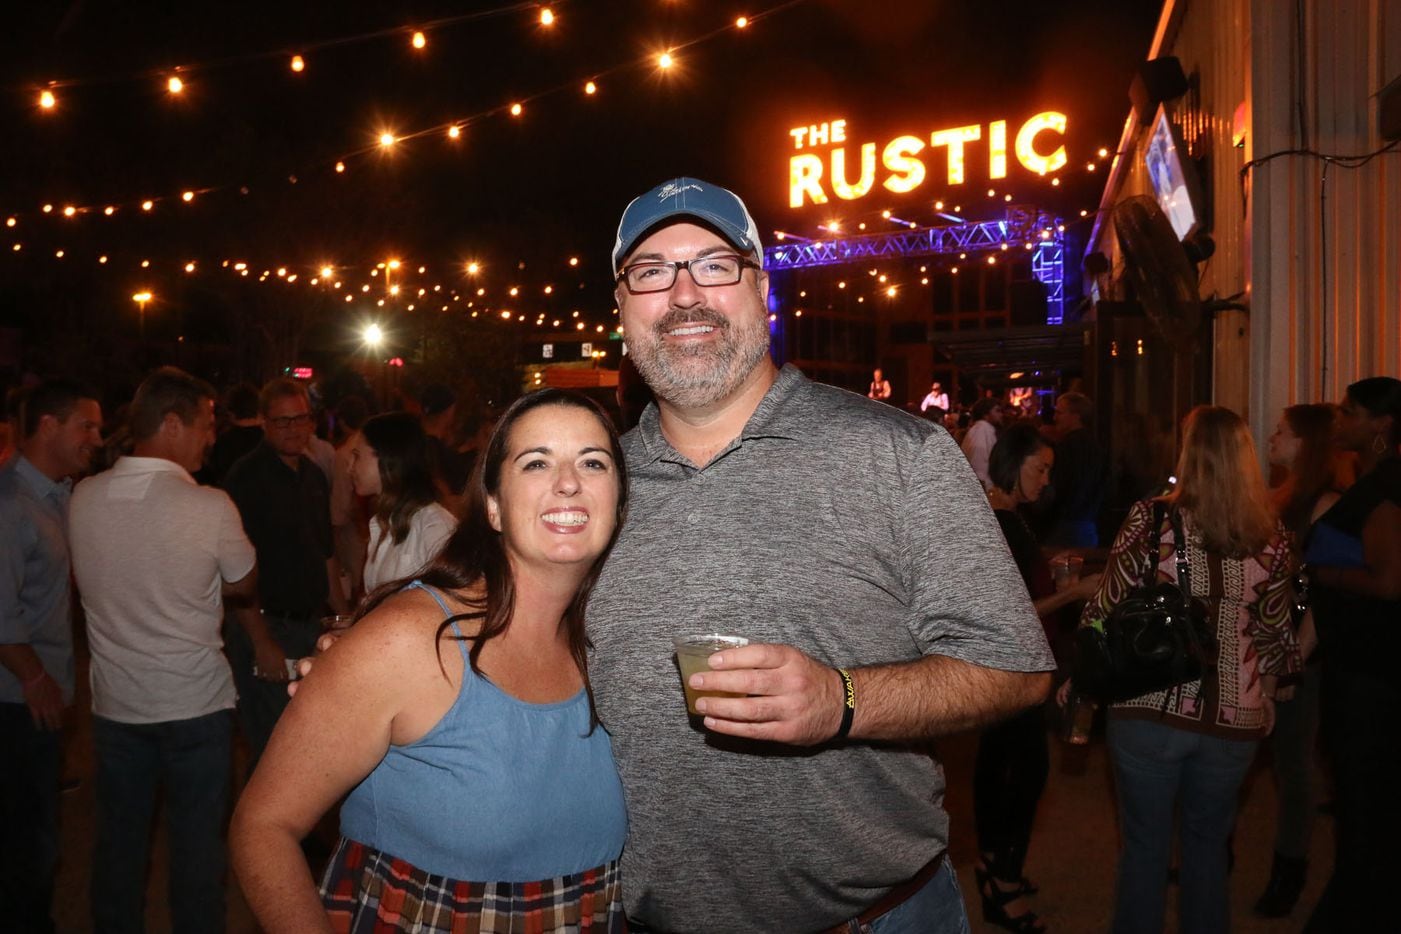 Jerry Jeff Walker fans came to see him perform at The Rustic in Uptown on October 9, 2015.